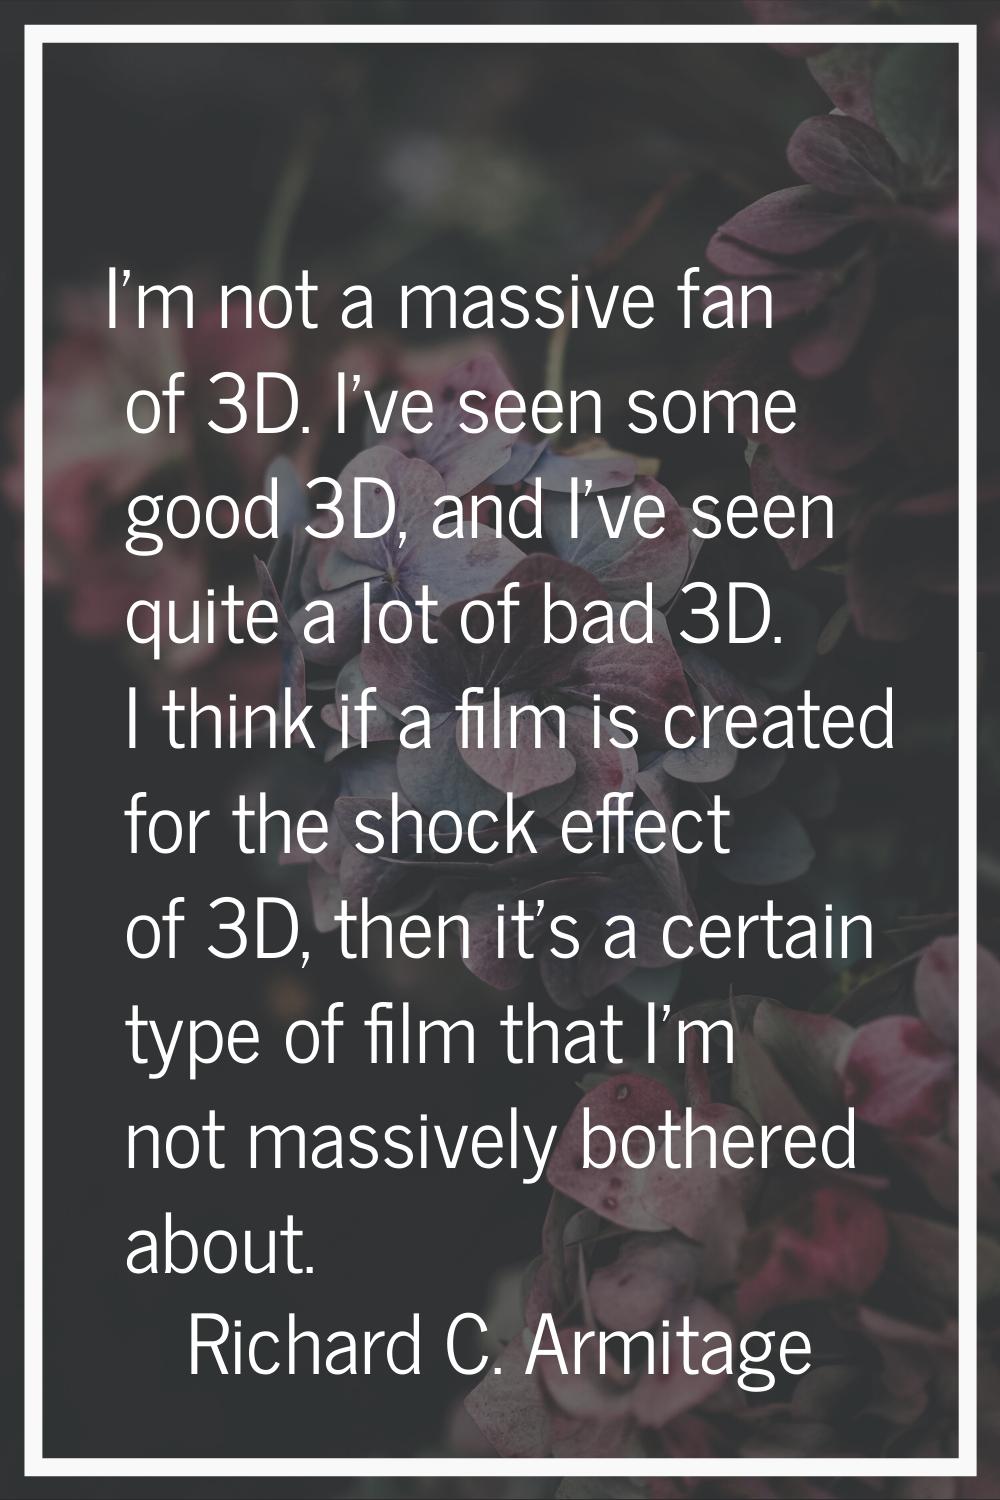 I'm not a massive fan of 3D. I've seen some good 3D, and I've seen quite a lot of bad 3D. I think i